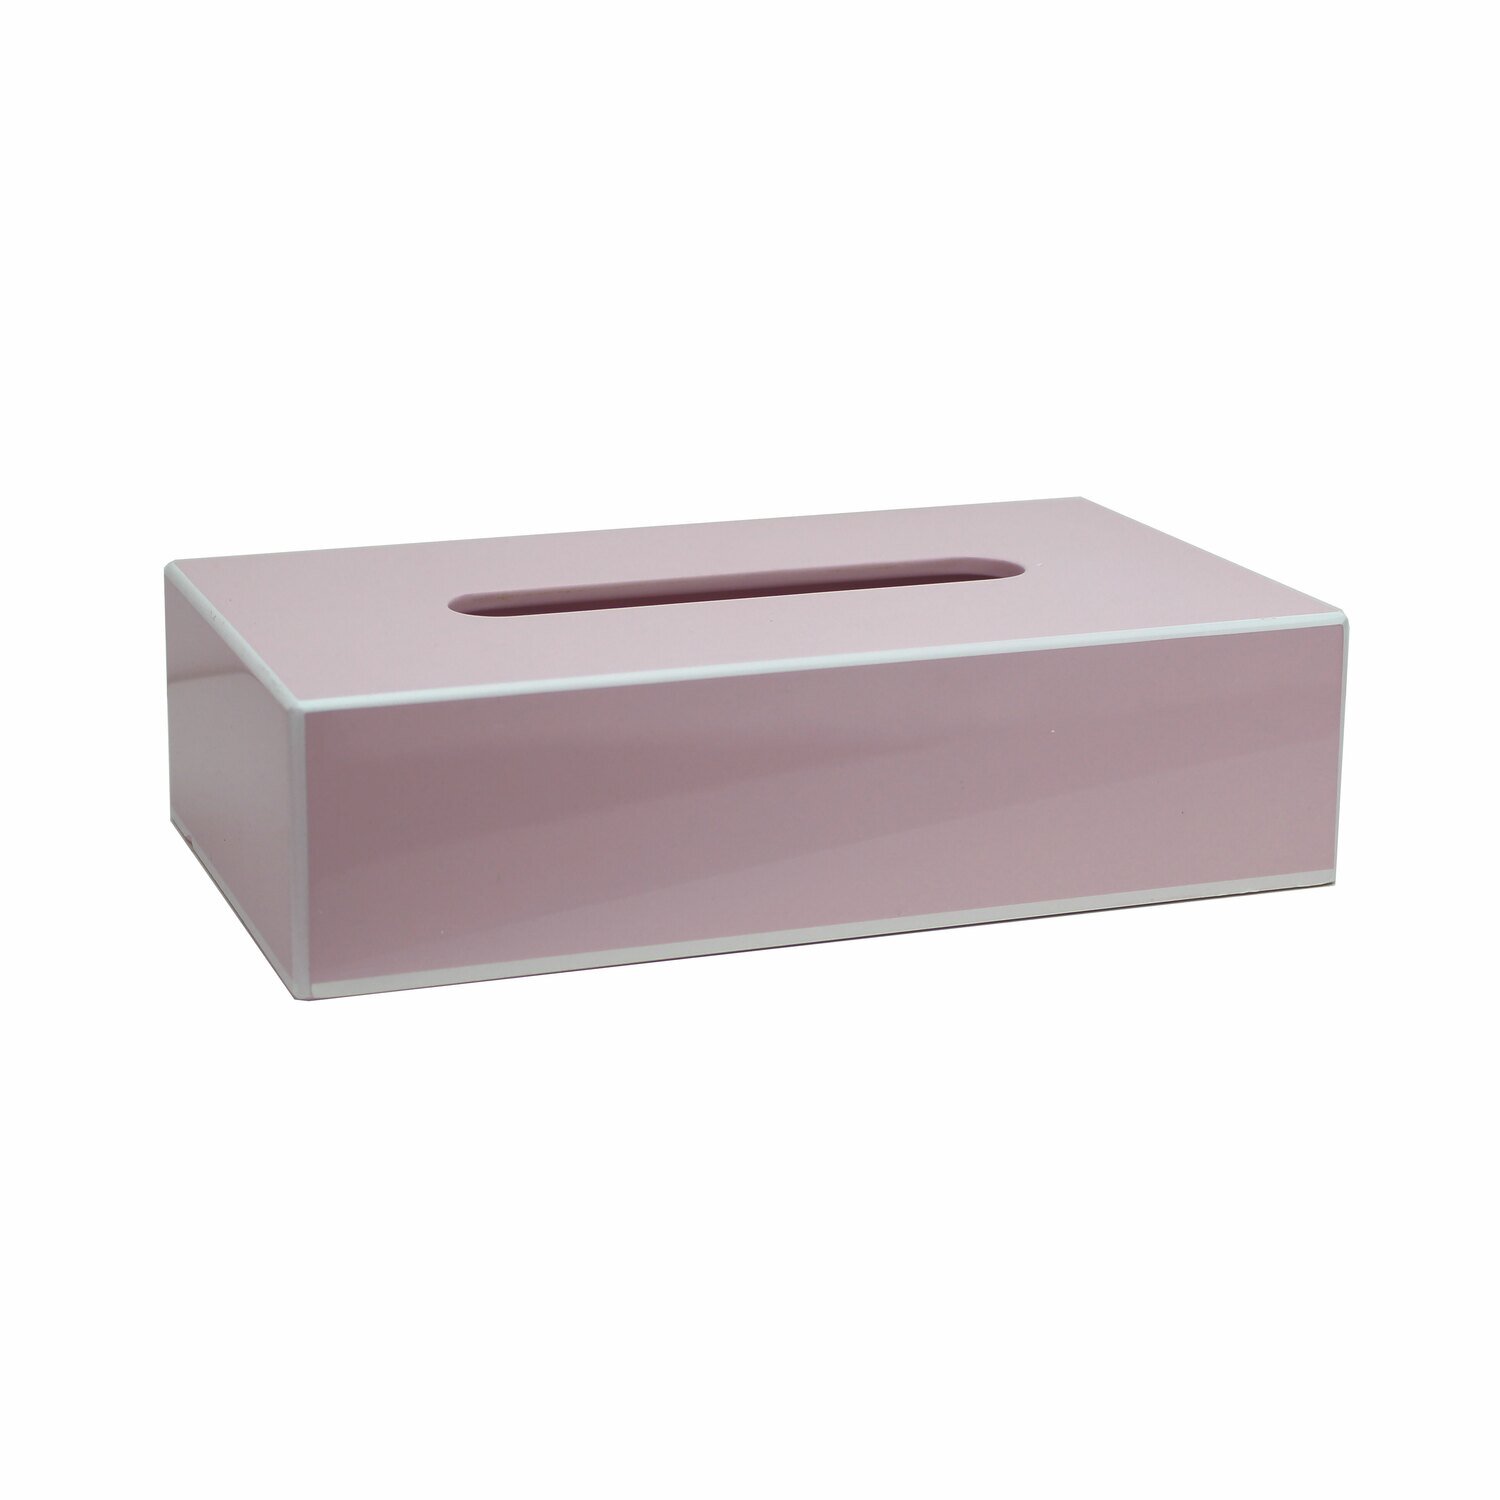 Addison Ross Tissue Box 10x4 Light Pink Lacquer TB2501